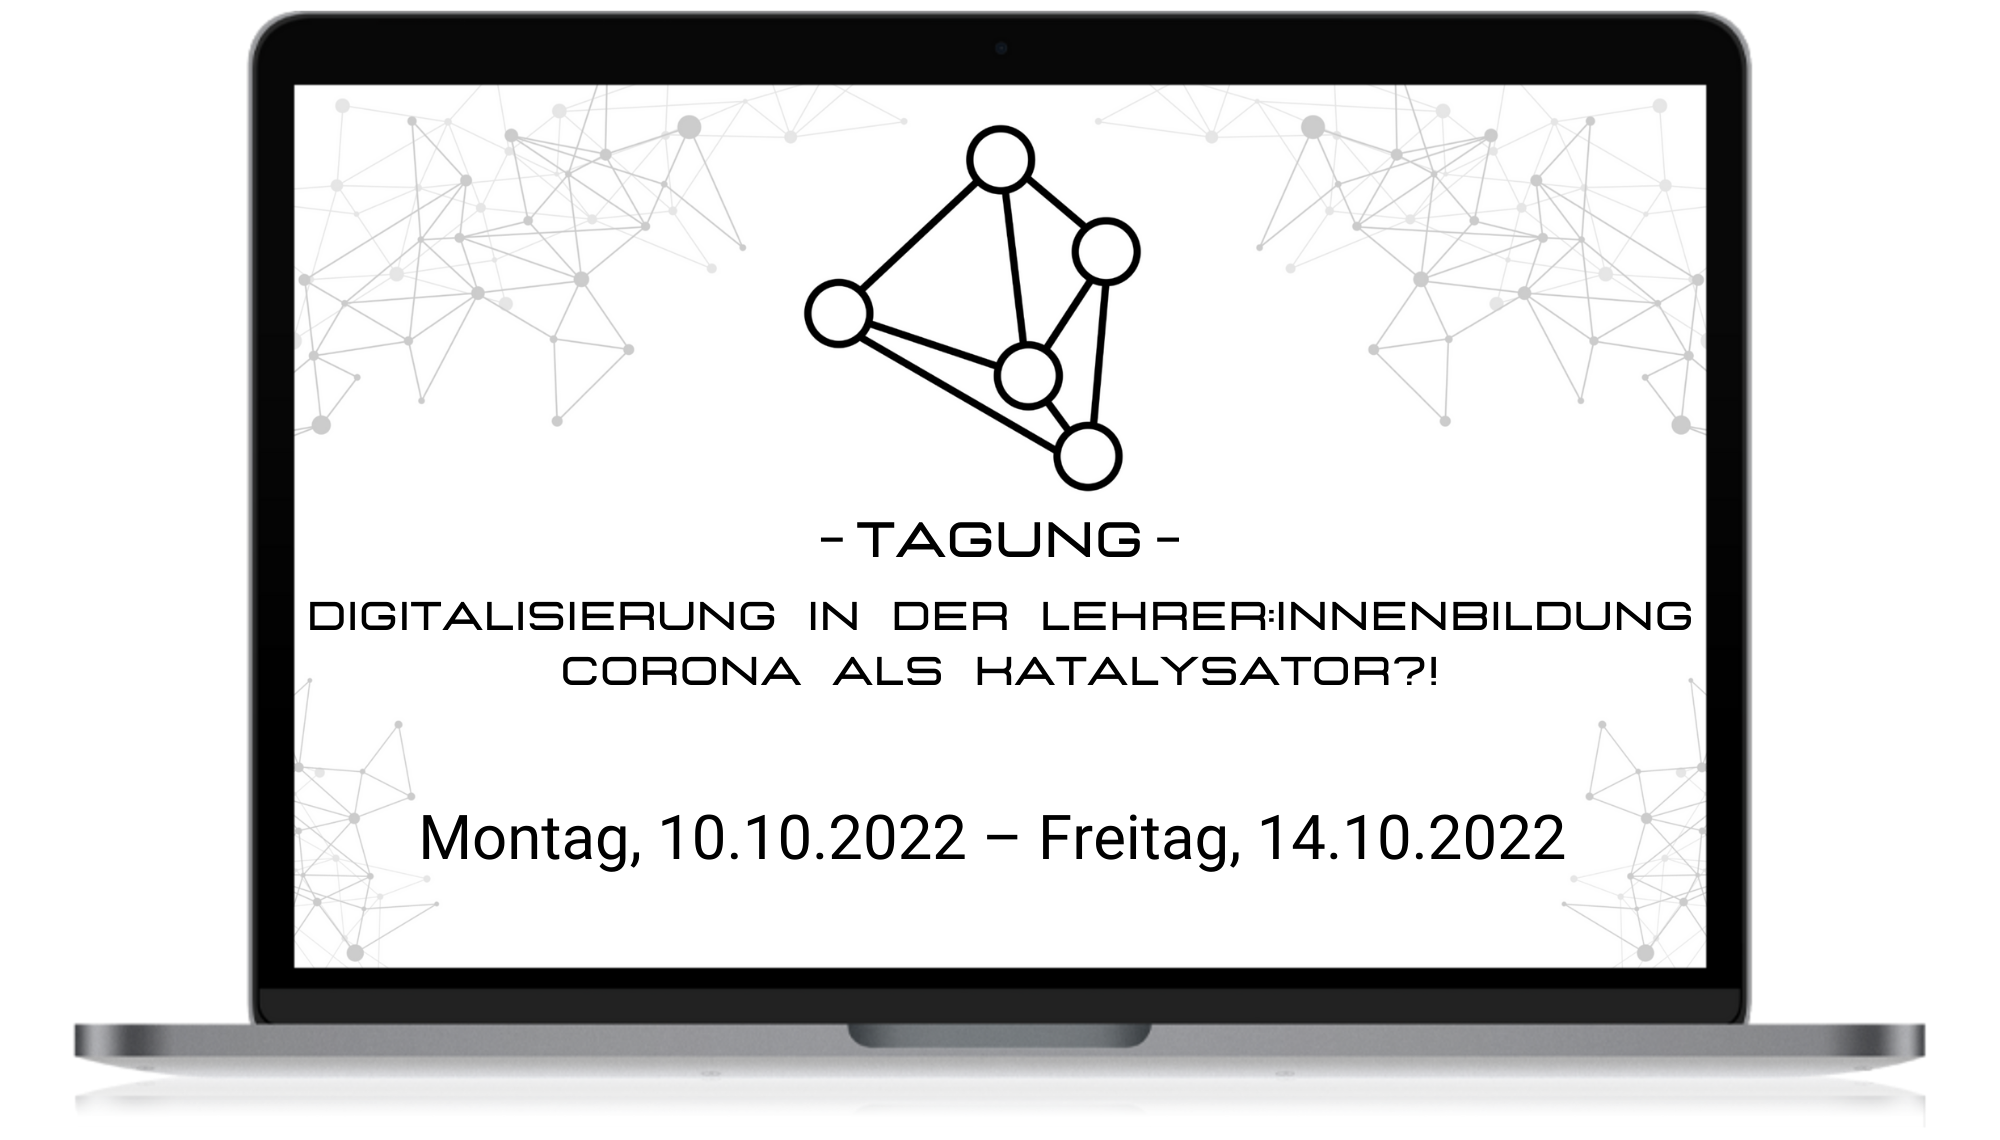 Tagung2022Flyer-e1650894674994.png (2000×1140)